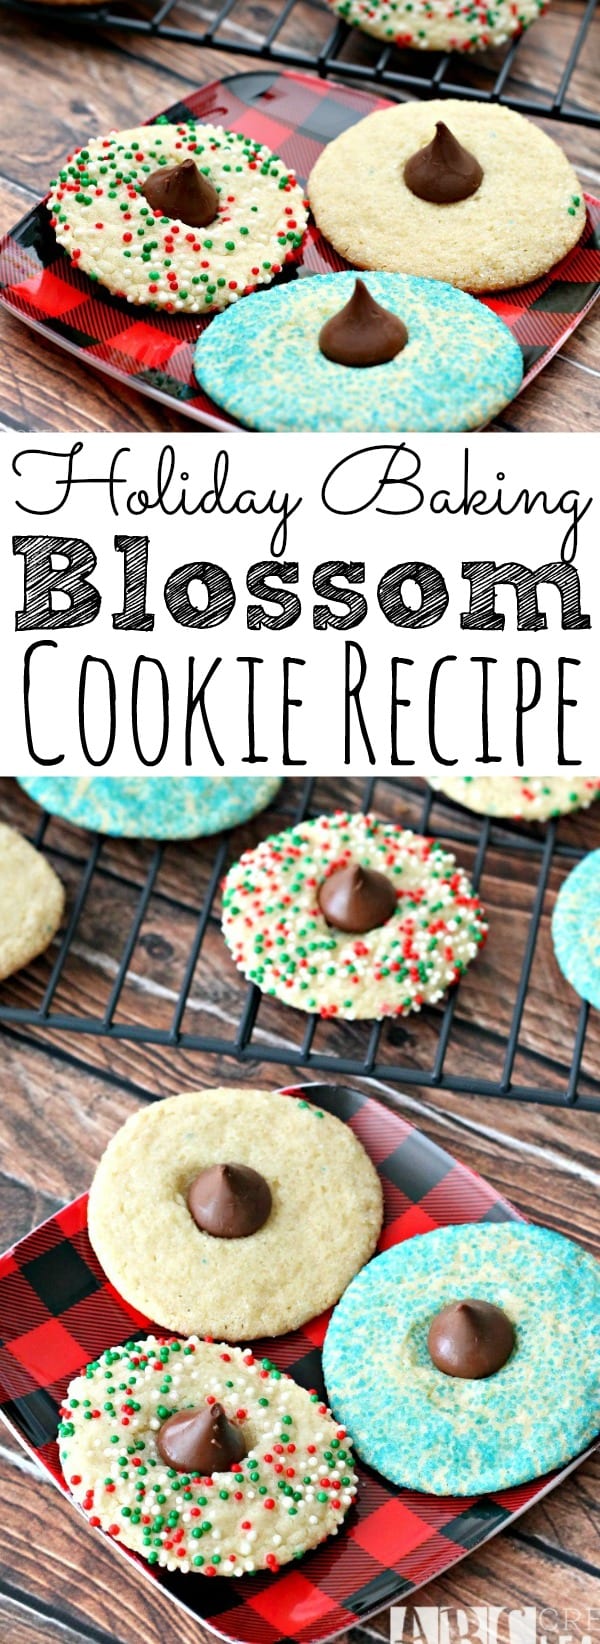 Holiday Baking Blossom Cookie Recipe